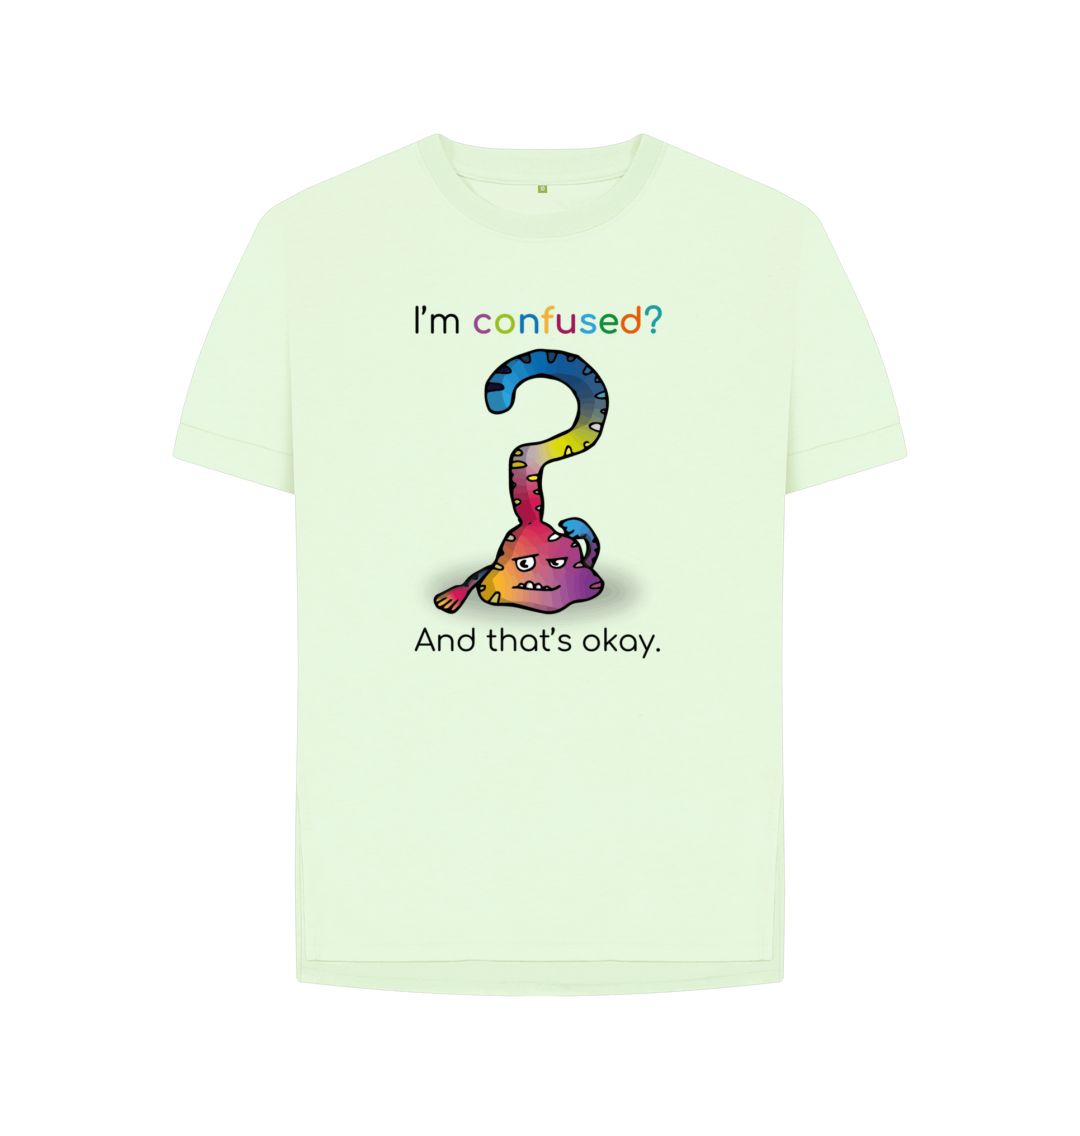 Pastel Green Confused Emotion Woman's Relaxed Organic Mental Health T-Shirt